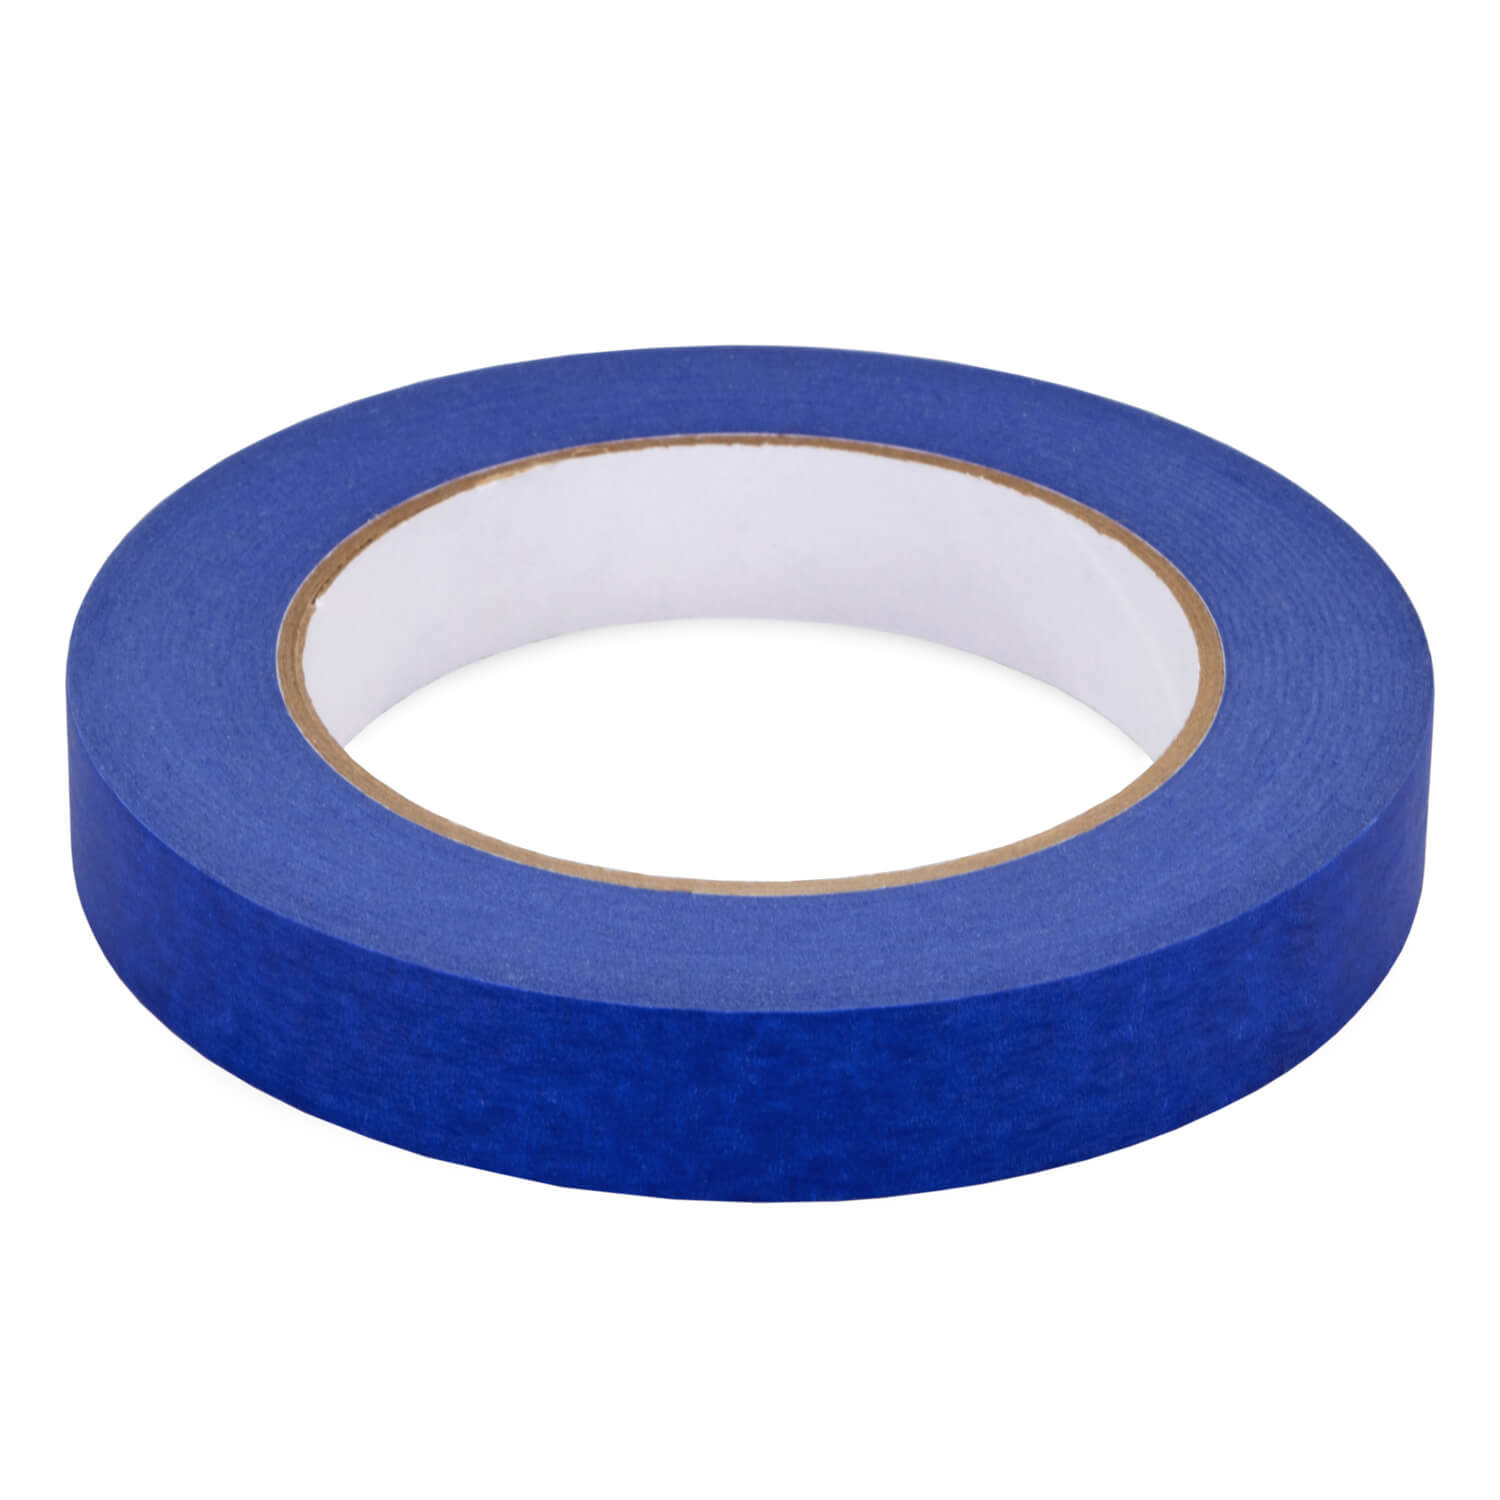  Colored Masking Tape, 16 Yards per Roll, 2 Inch Wide, 5 Rolls, Colored  Painter